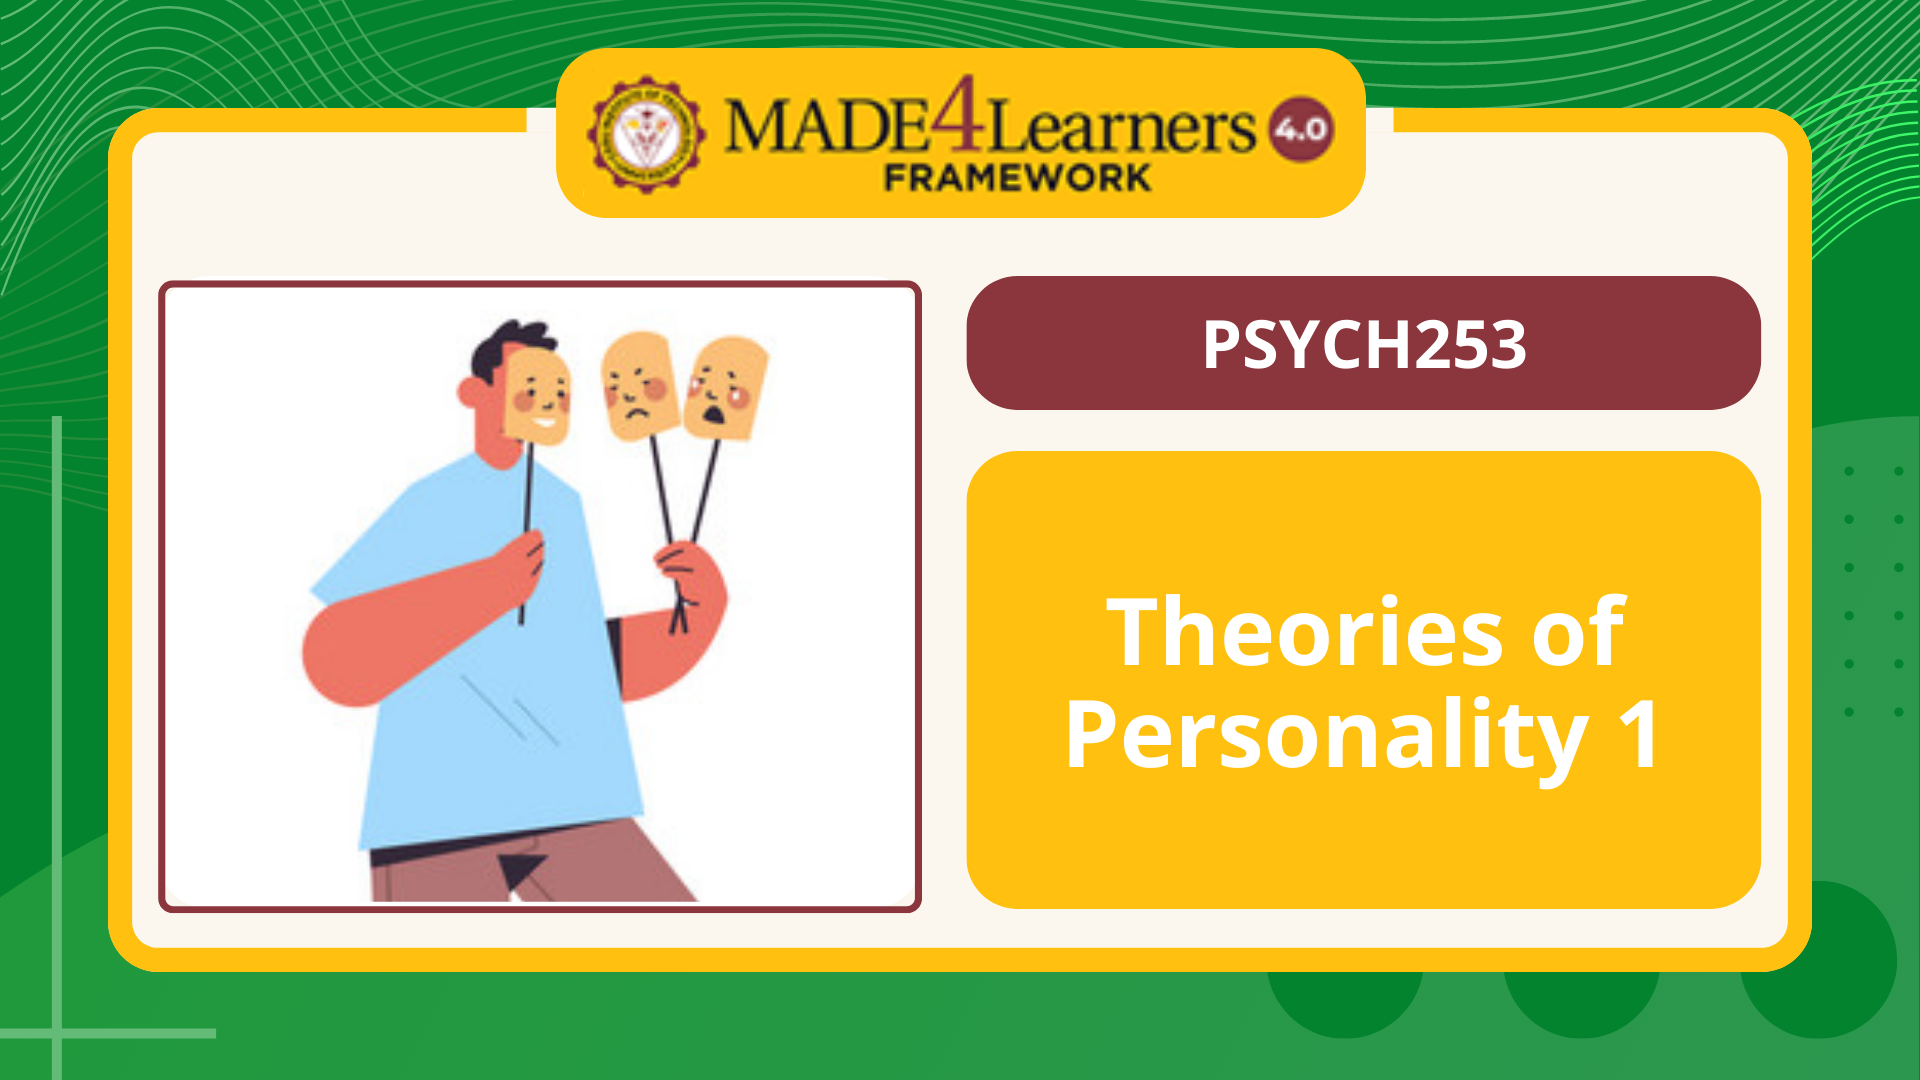 PSYCH253 Theories of Personality 1 - E4.C1